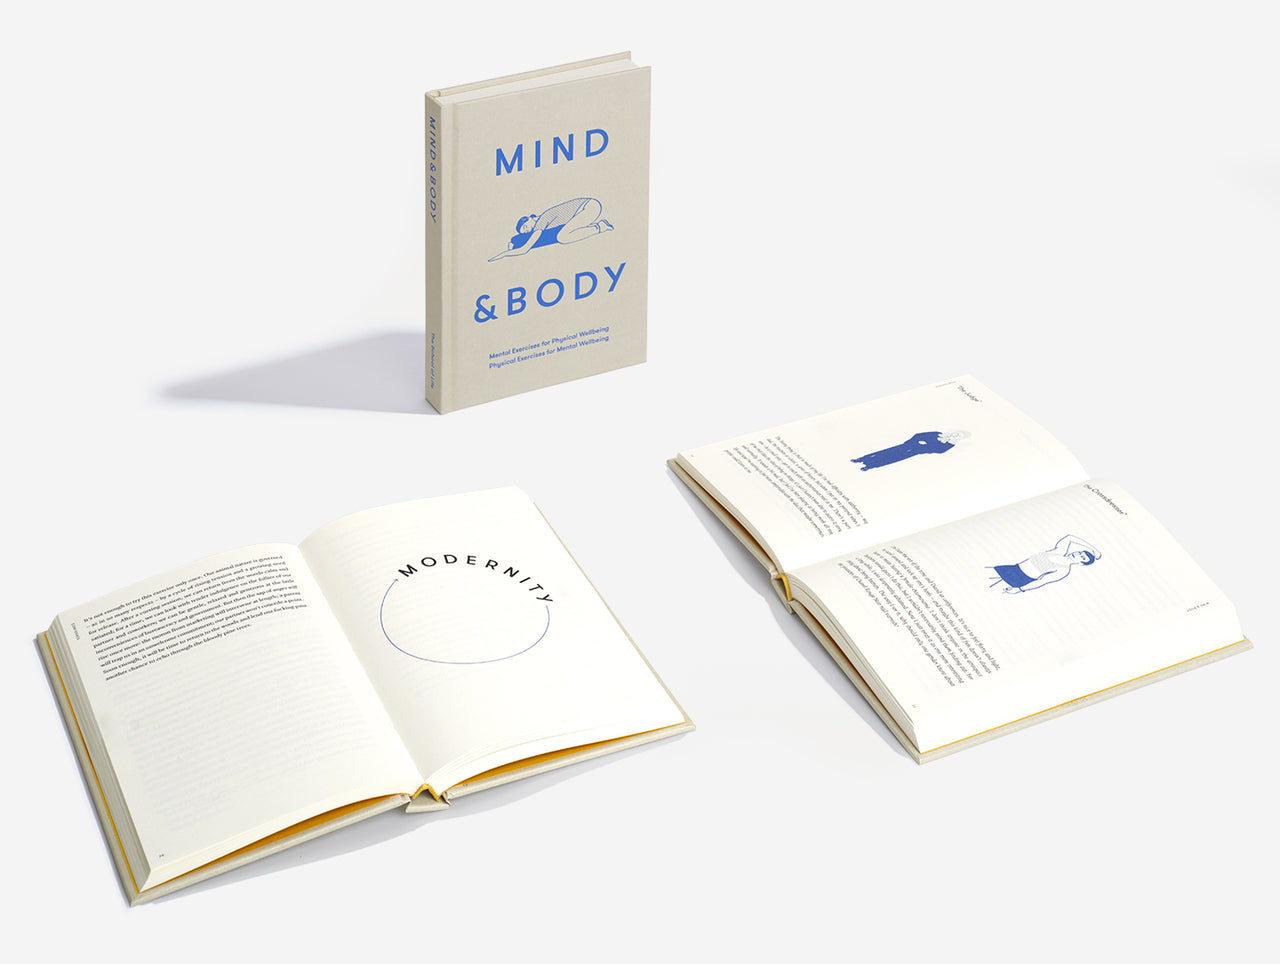 Mind & Body by The School of Life